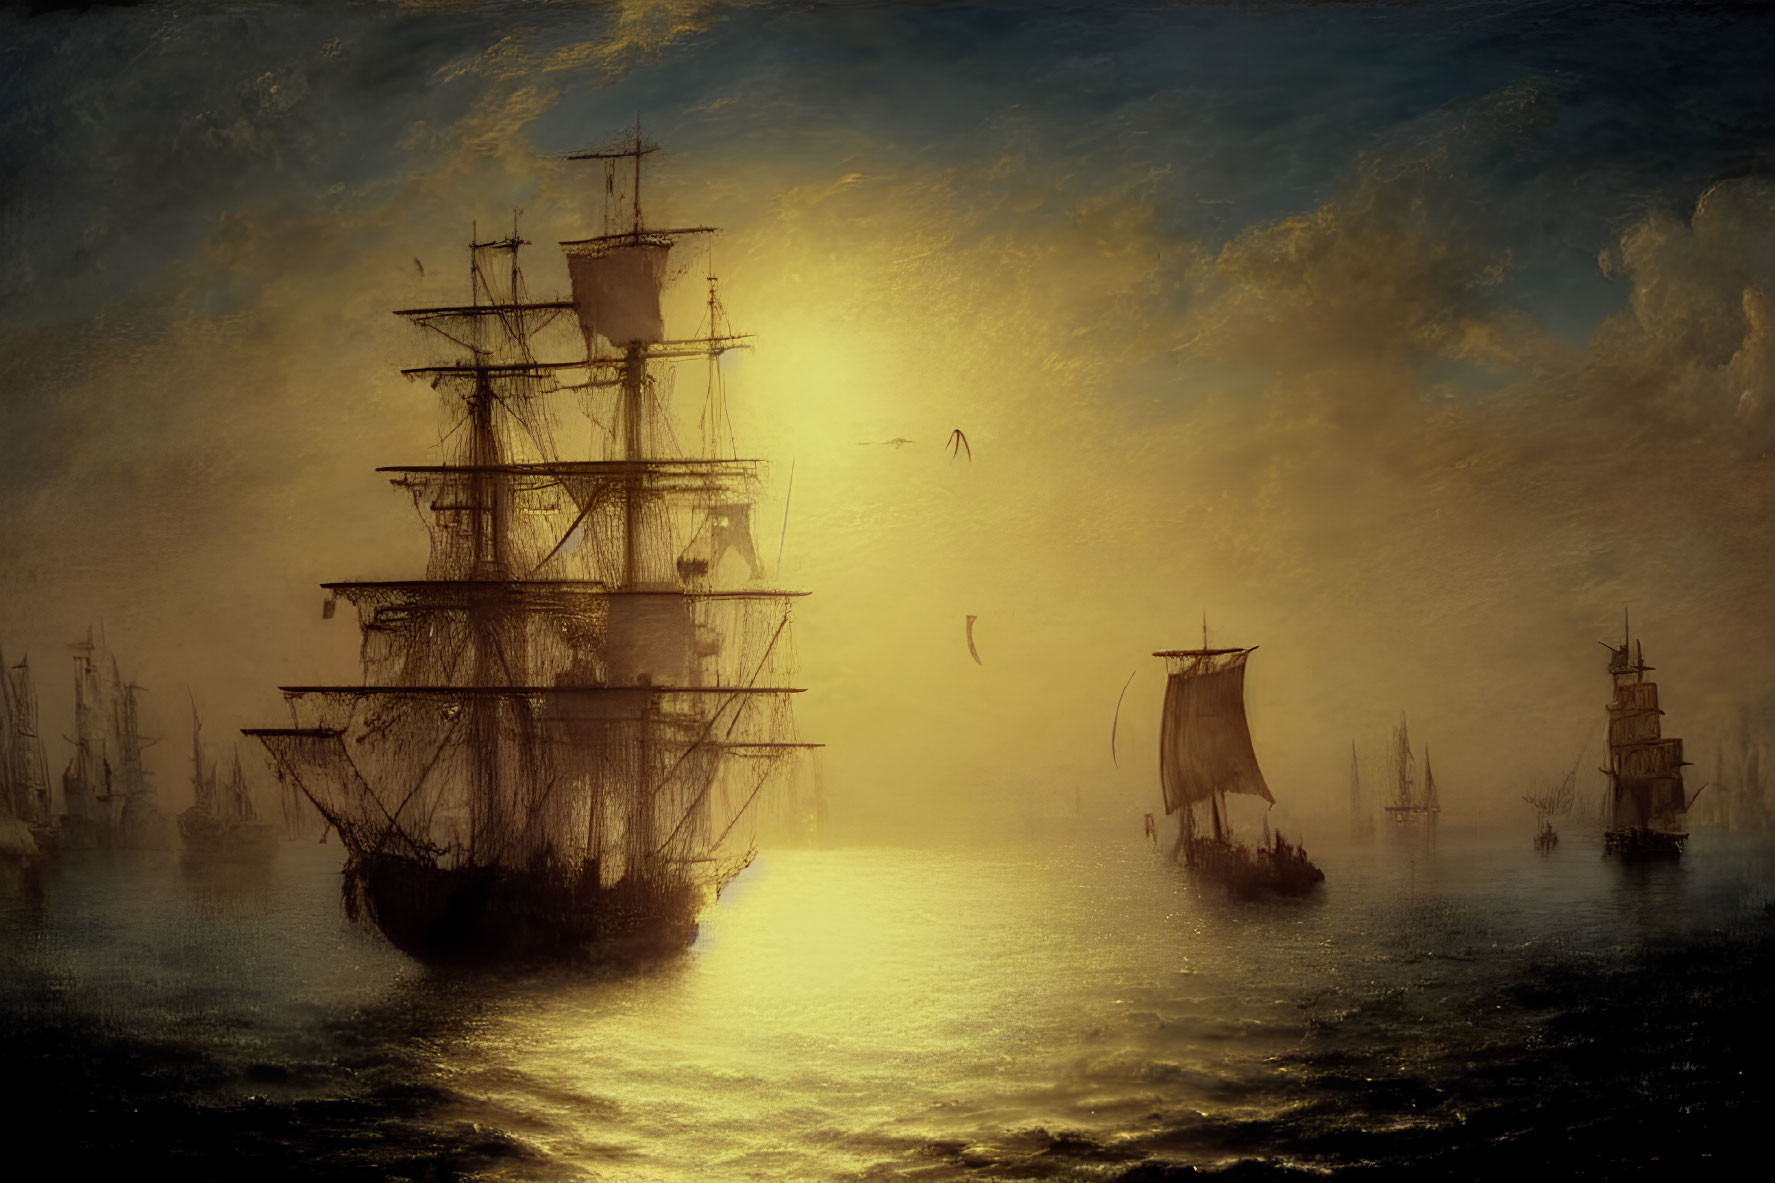 Golden sunset at sea with tall ship silhouettes, water reflections, birds, and hazy atmosphere